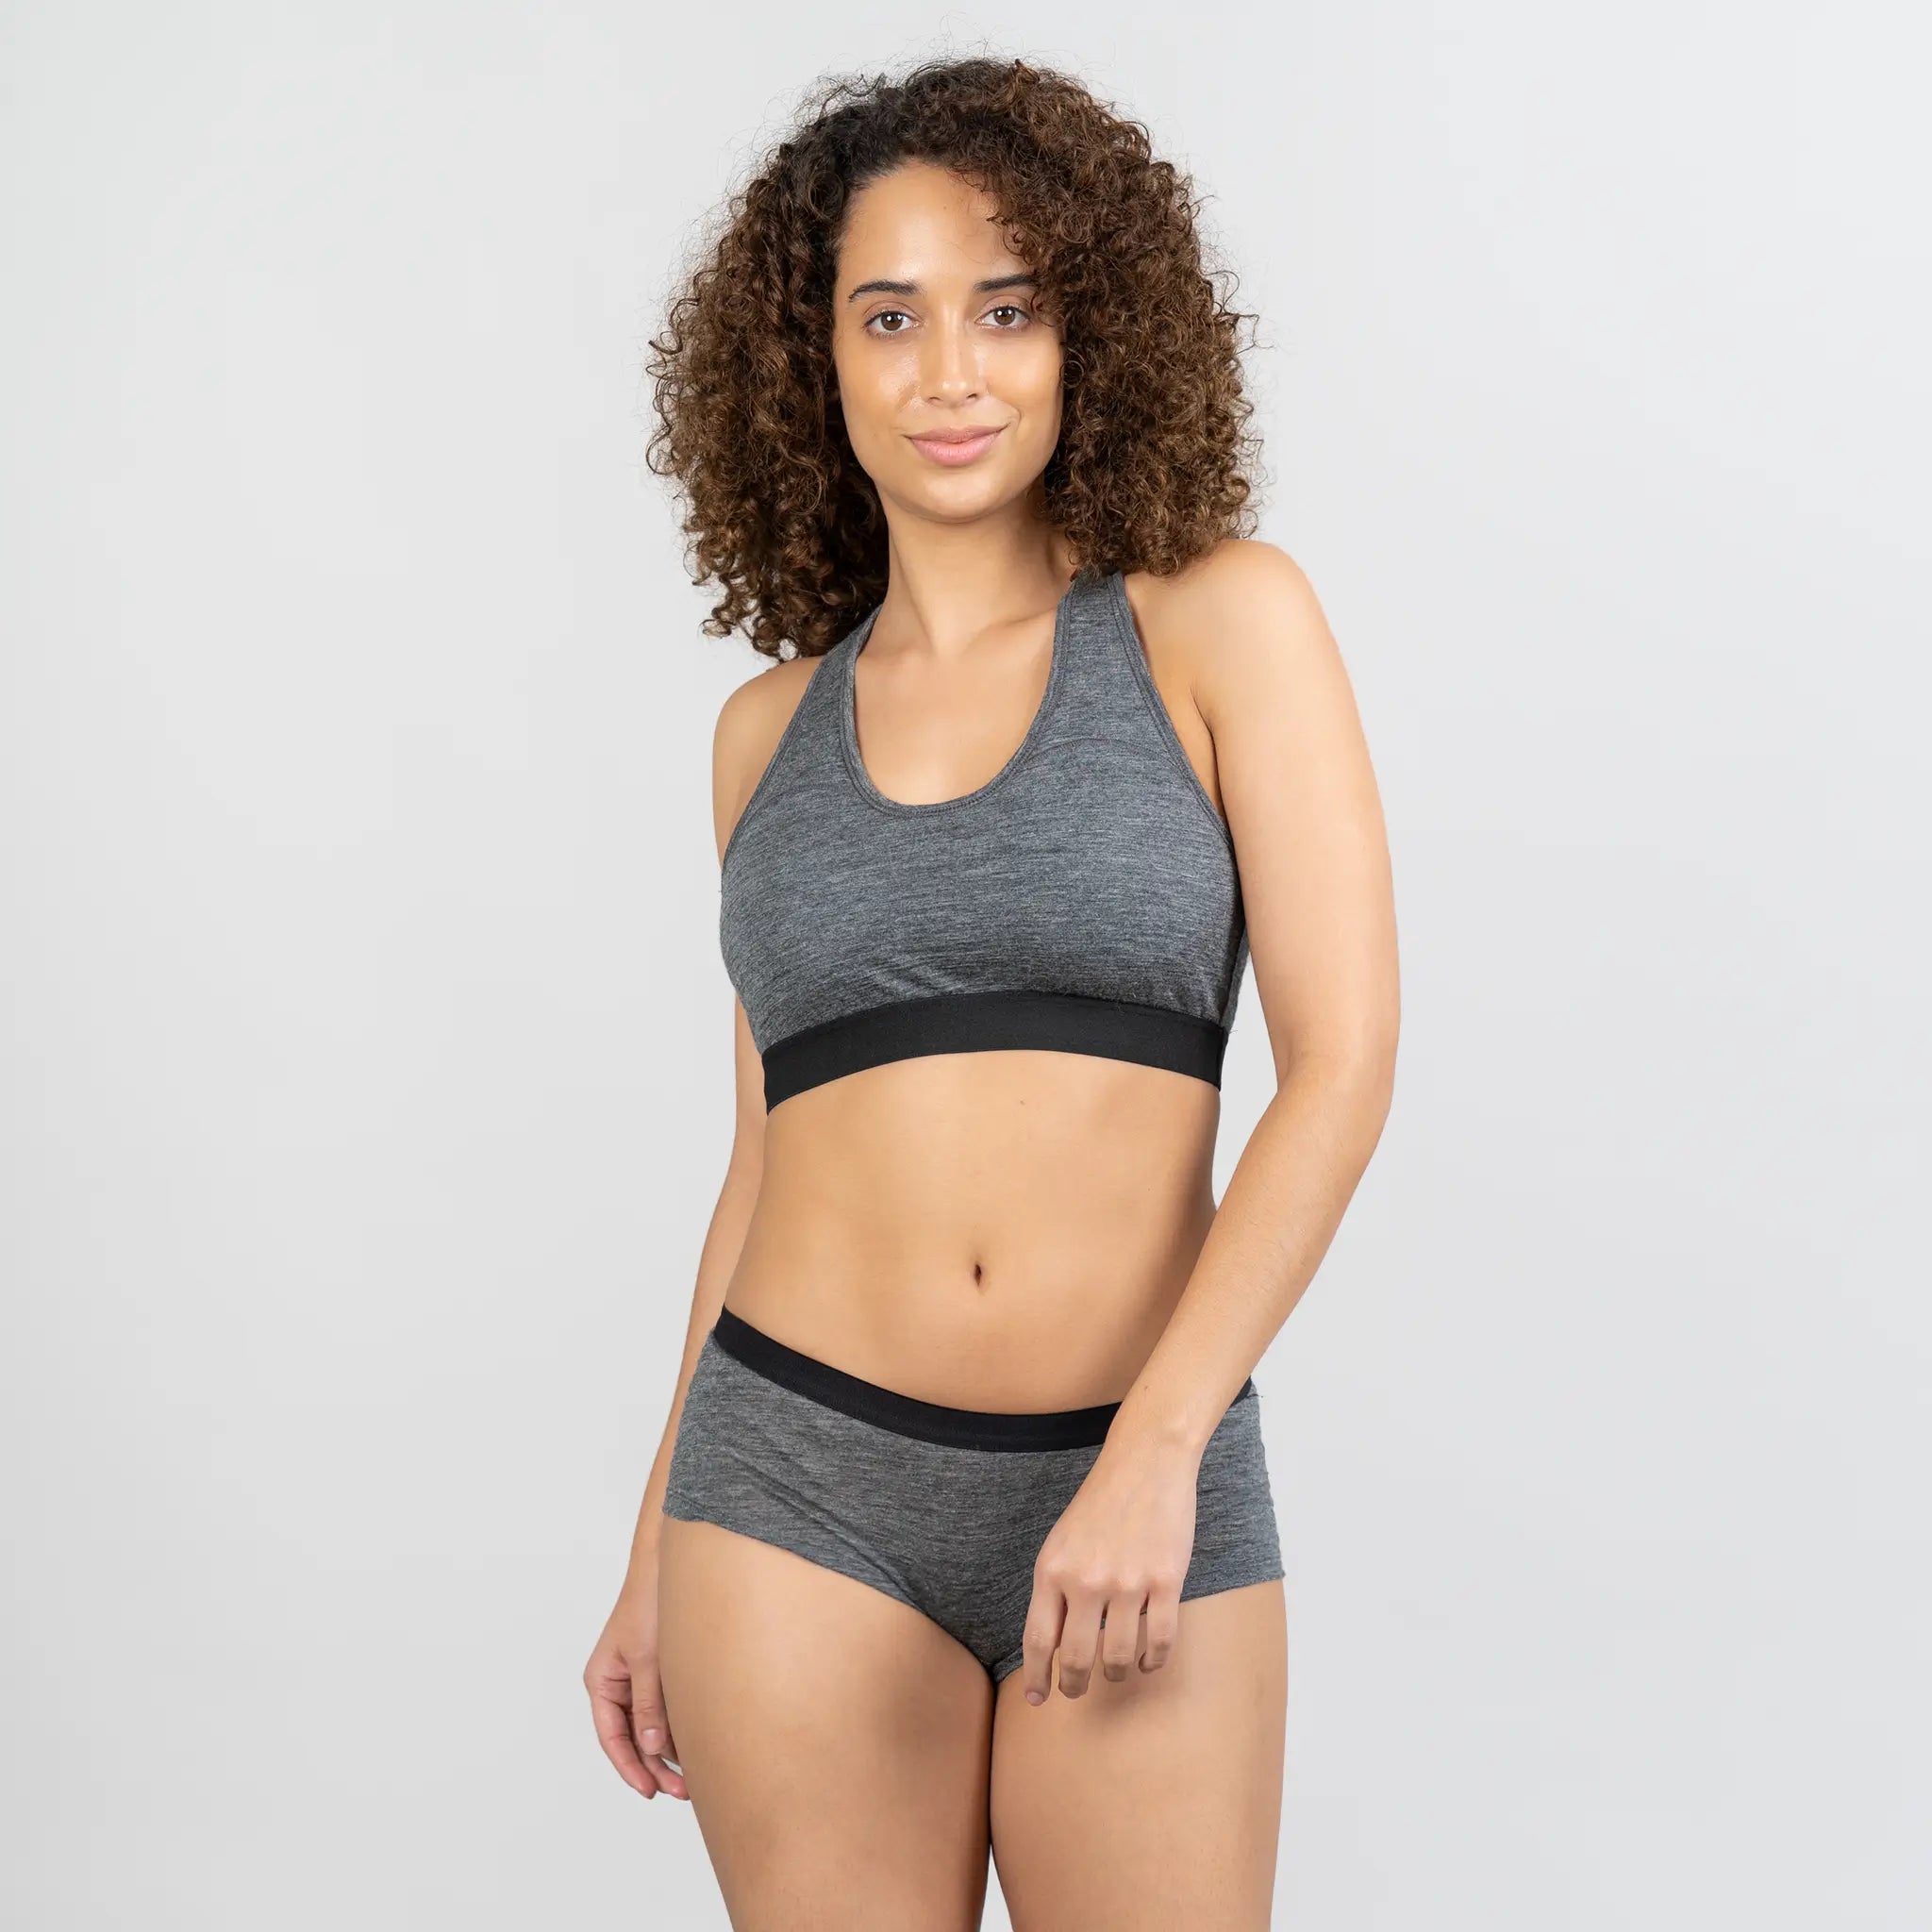 womens eco frriendly panties ultralight color gray